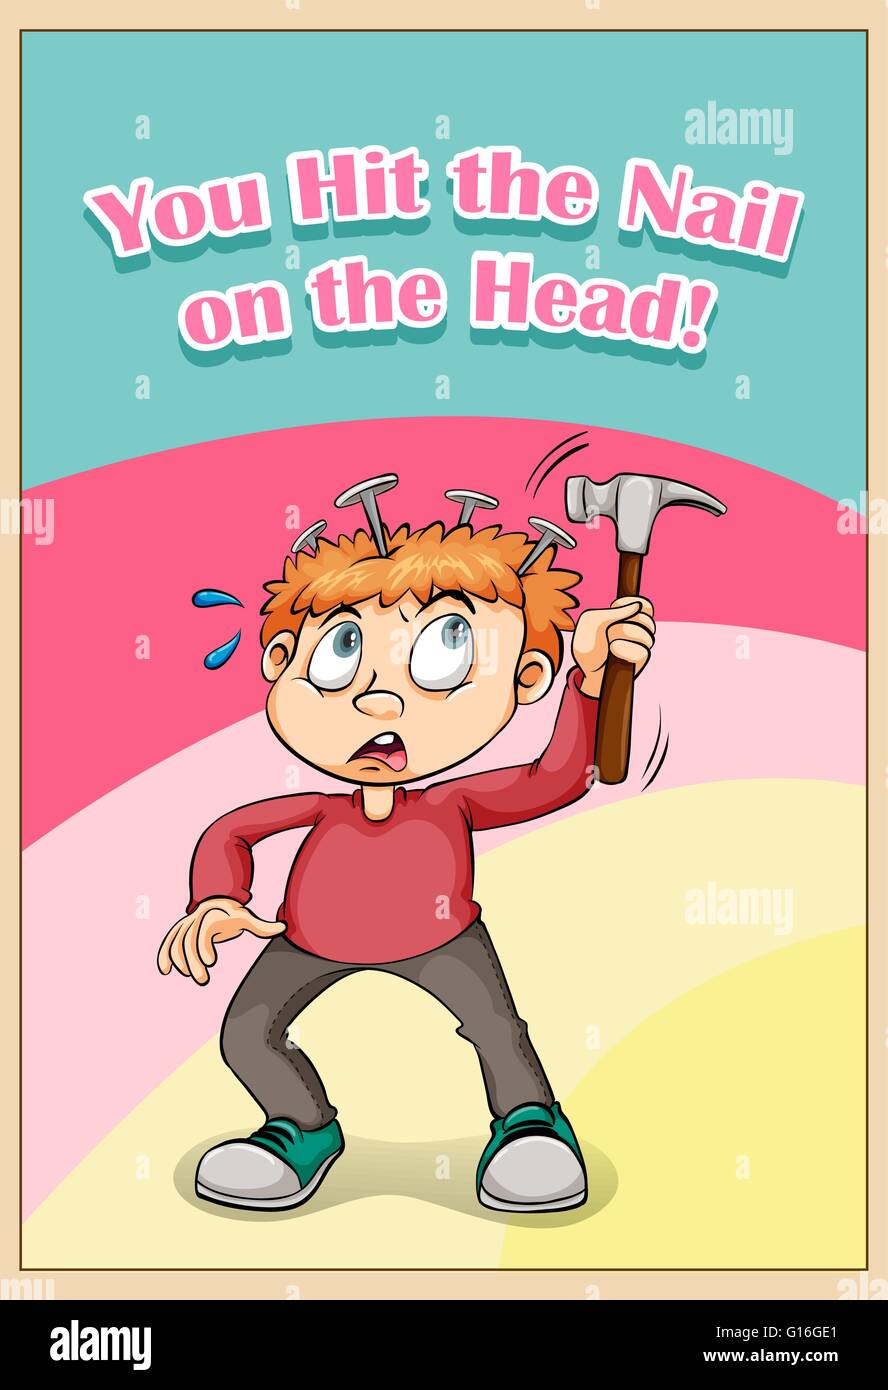 You hit the nail on the head illustration Stock Vector